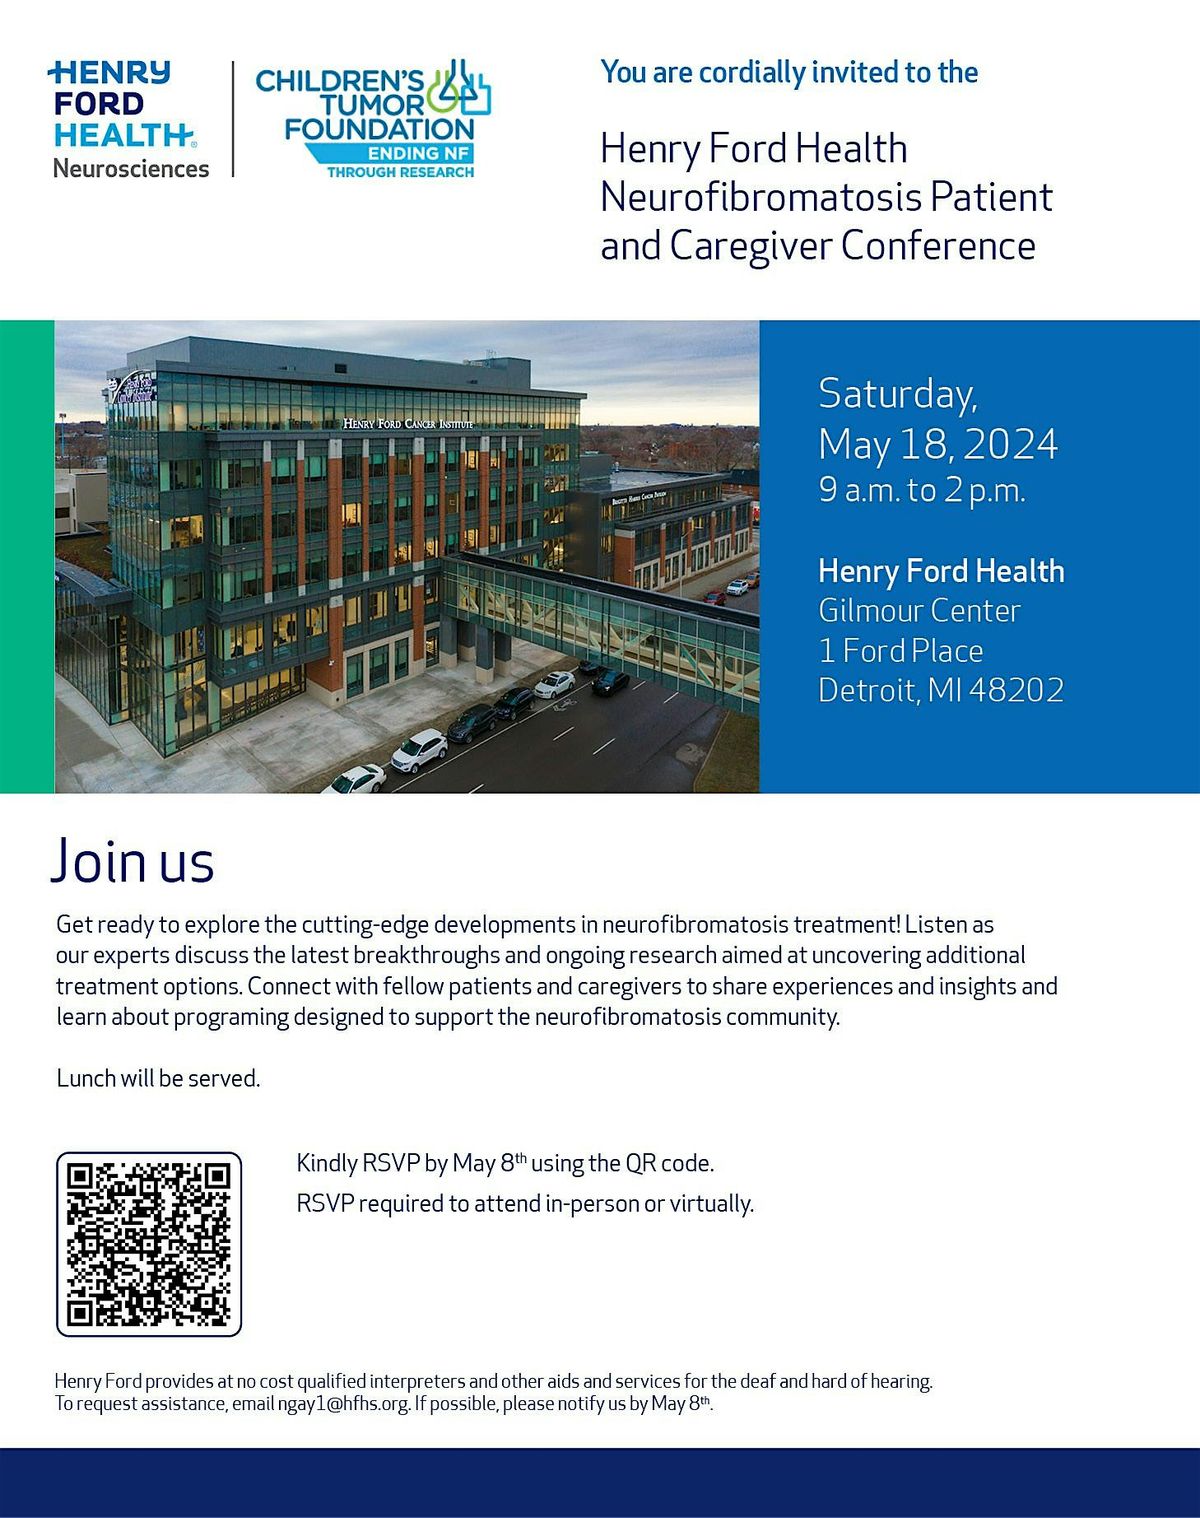 Neurofibromatosis Patient and Caregiver Conference - Henry Ford Health